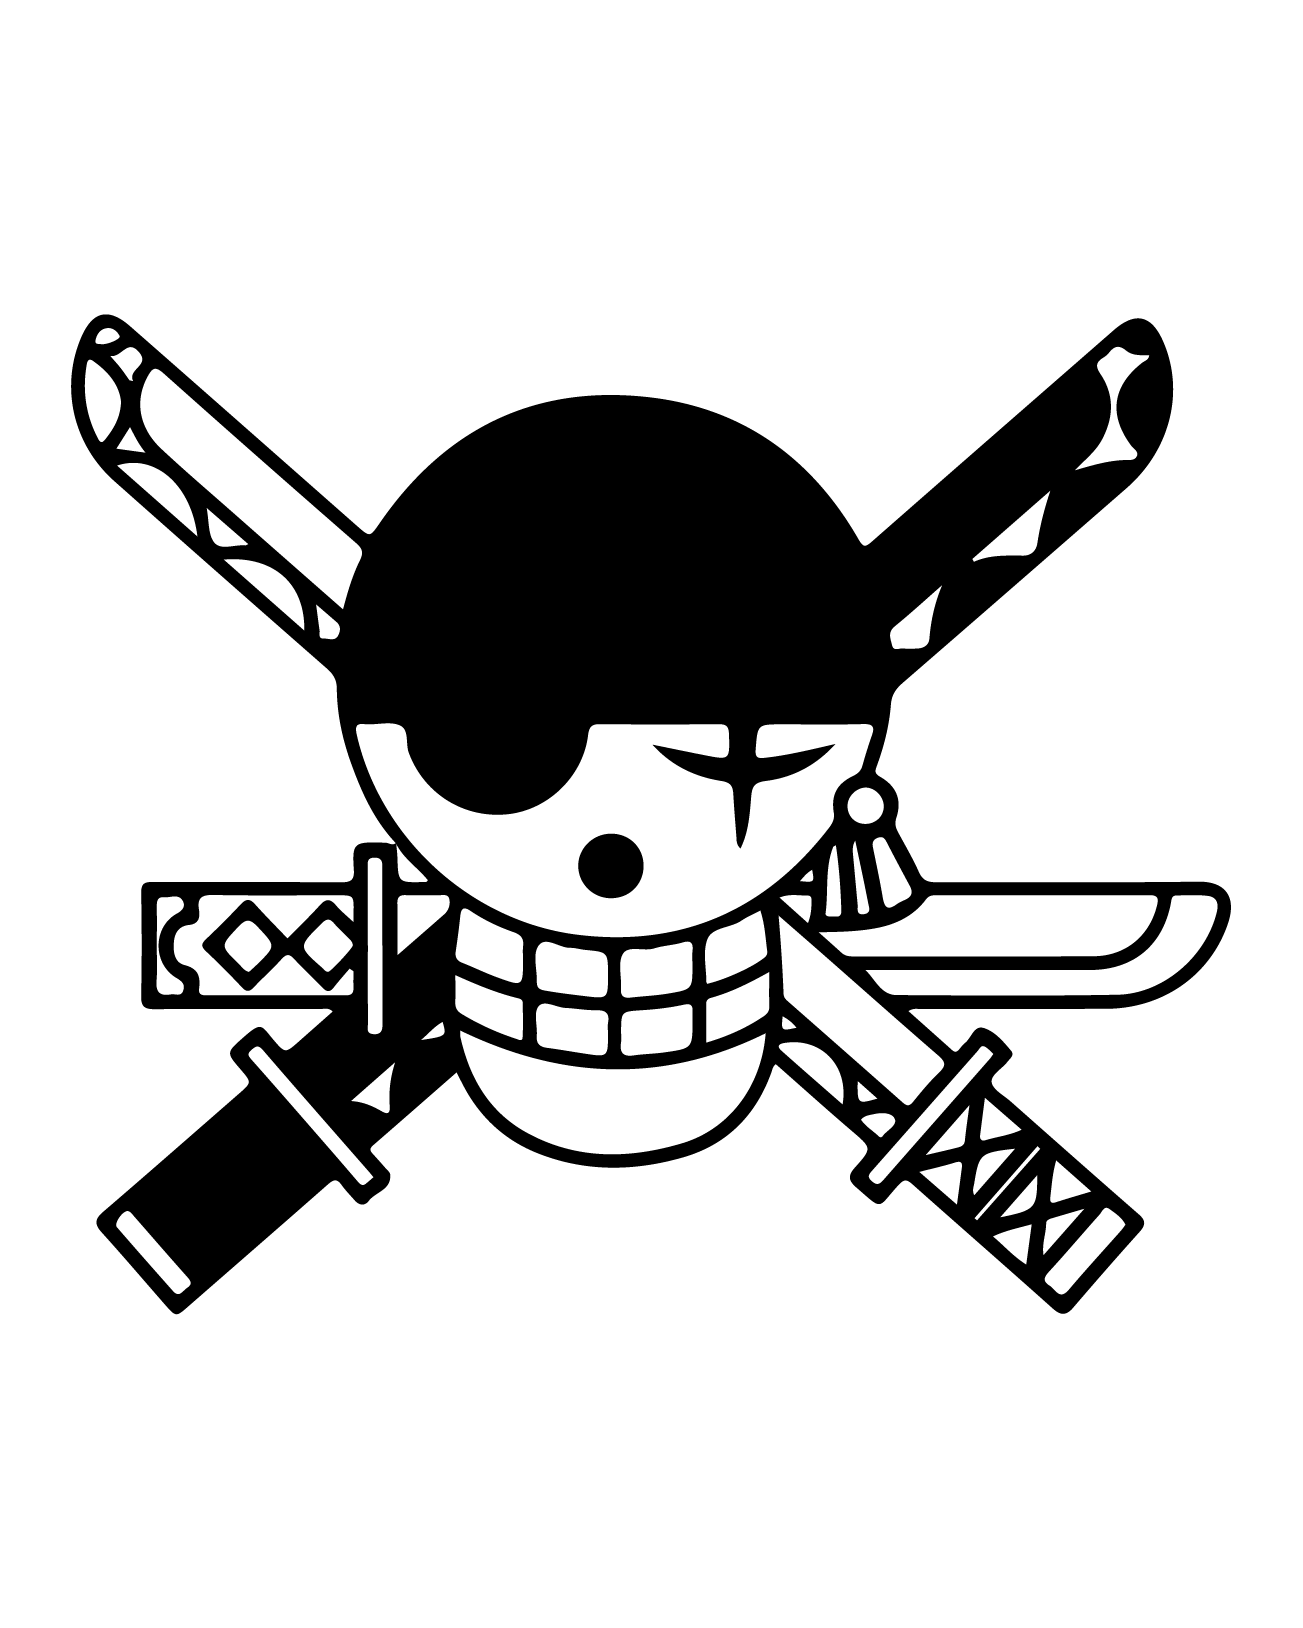 Jolly Roger  One piece logo, One piece tattoos, Jolly roger